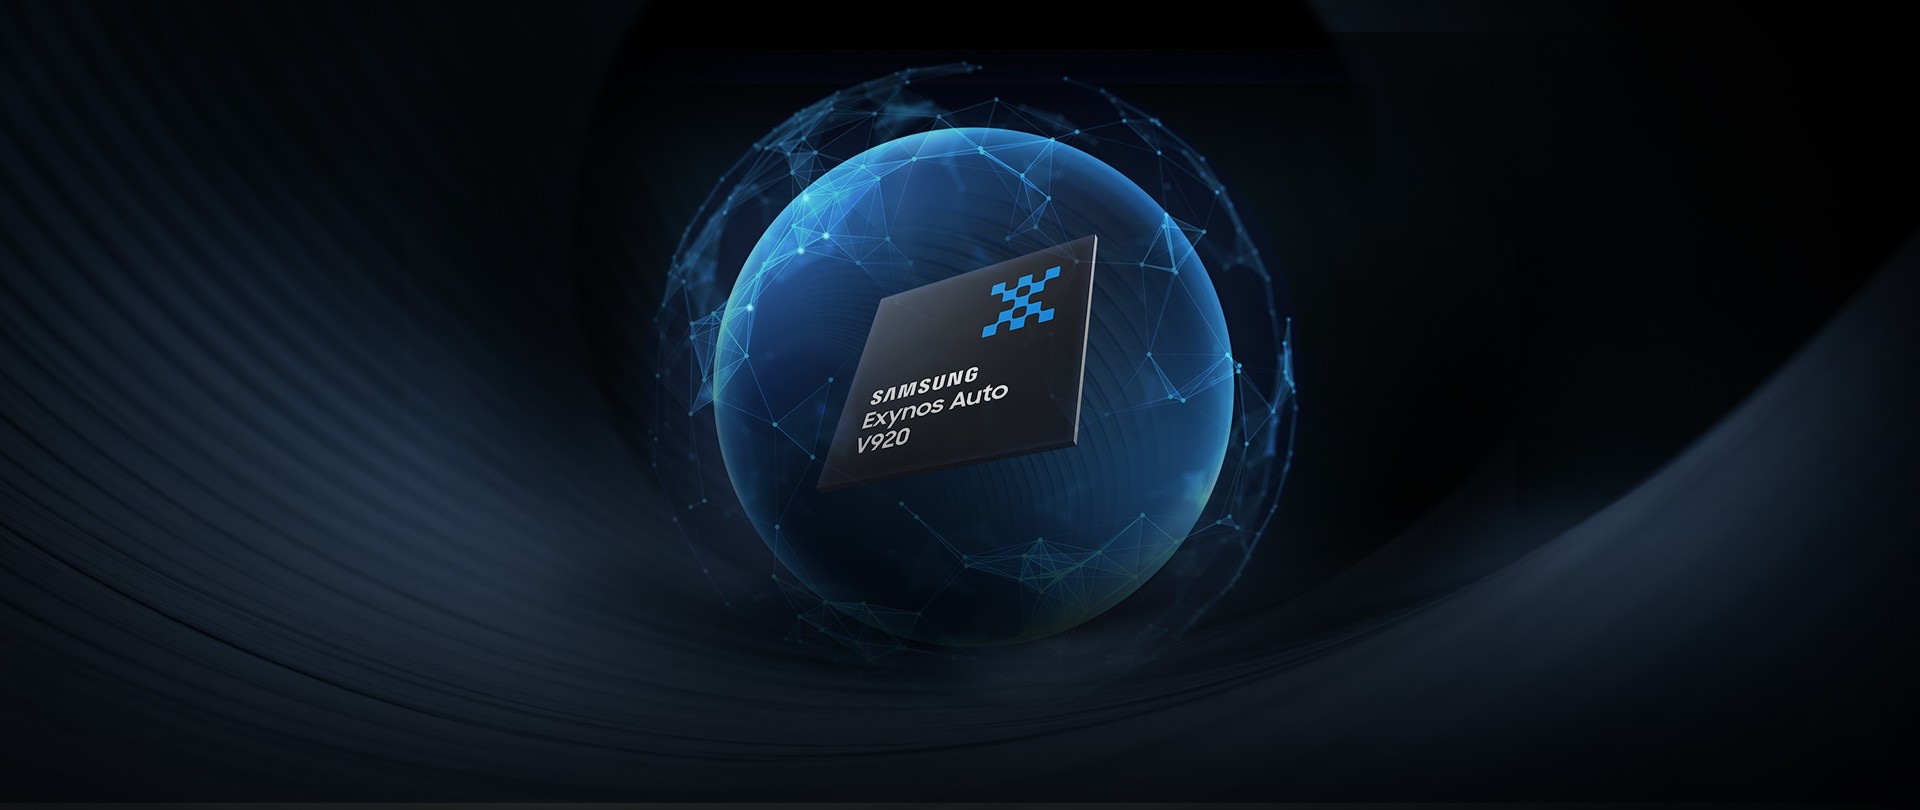 Samsung Exynos Auto V92: Secure from Security Attacks with Certified Technology.